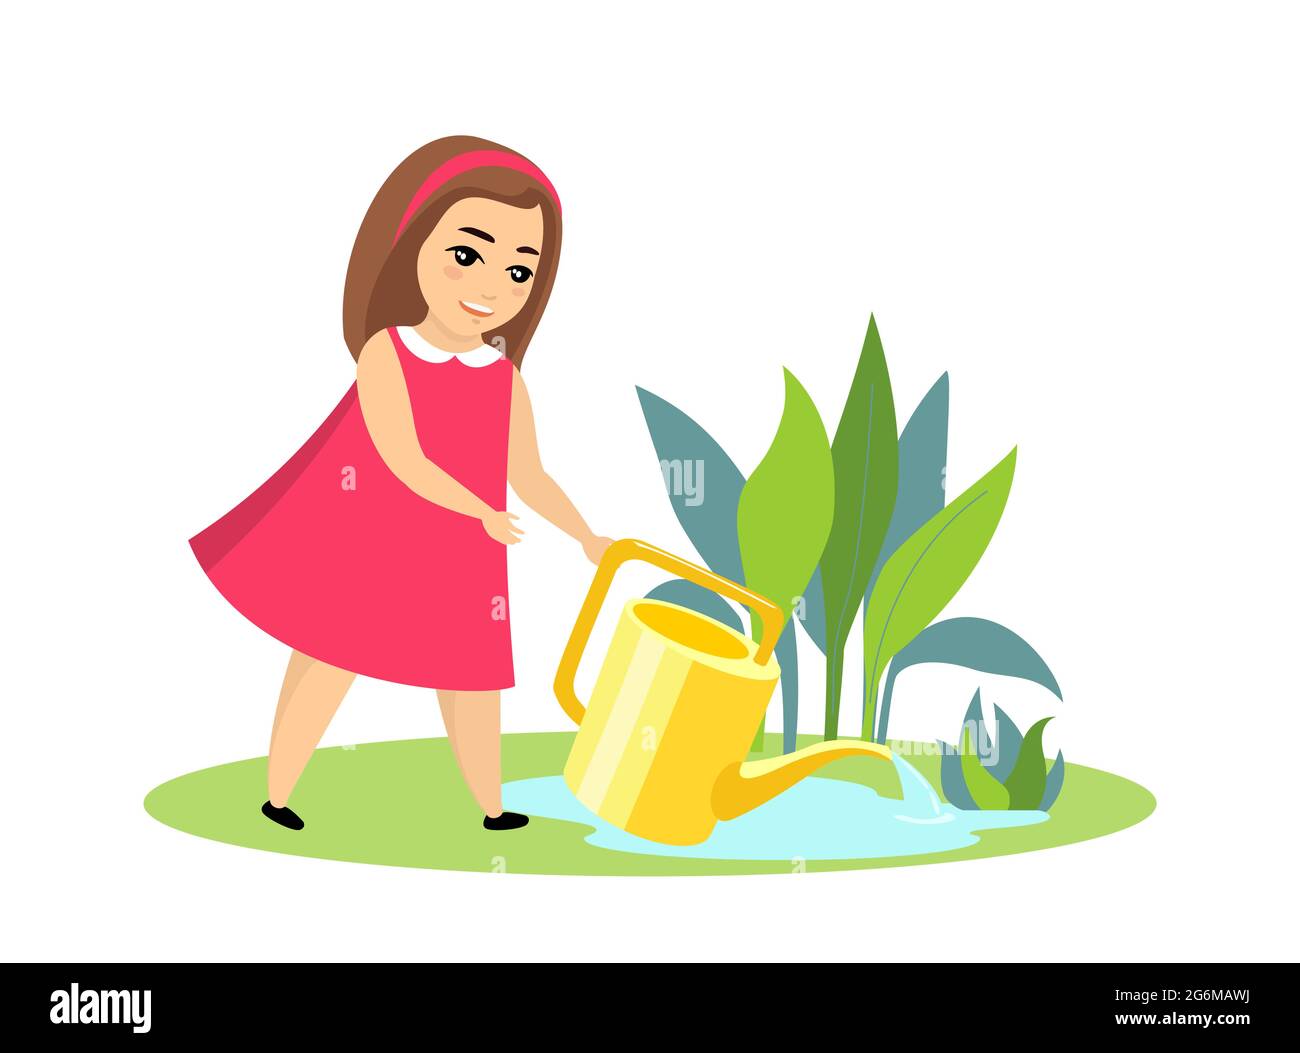 Little girl in pink dress waters growing plants with watering can. Cute female child hobby gardening. Kid working in vegetable garden vector isolated illustration Stock Vector